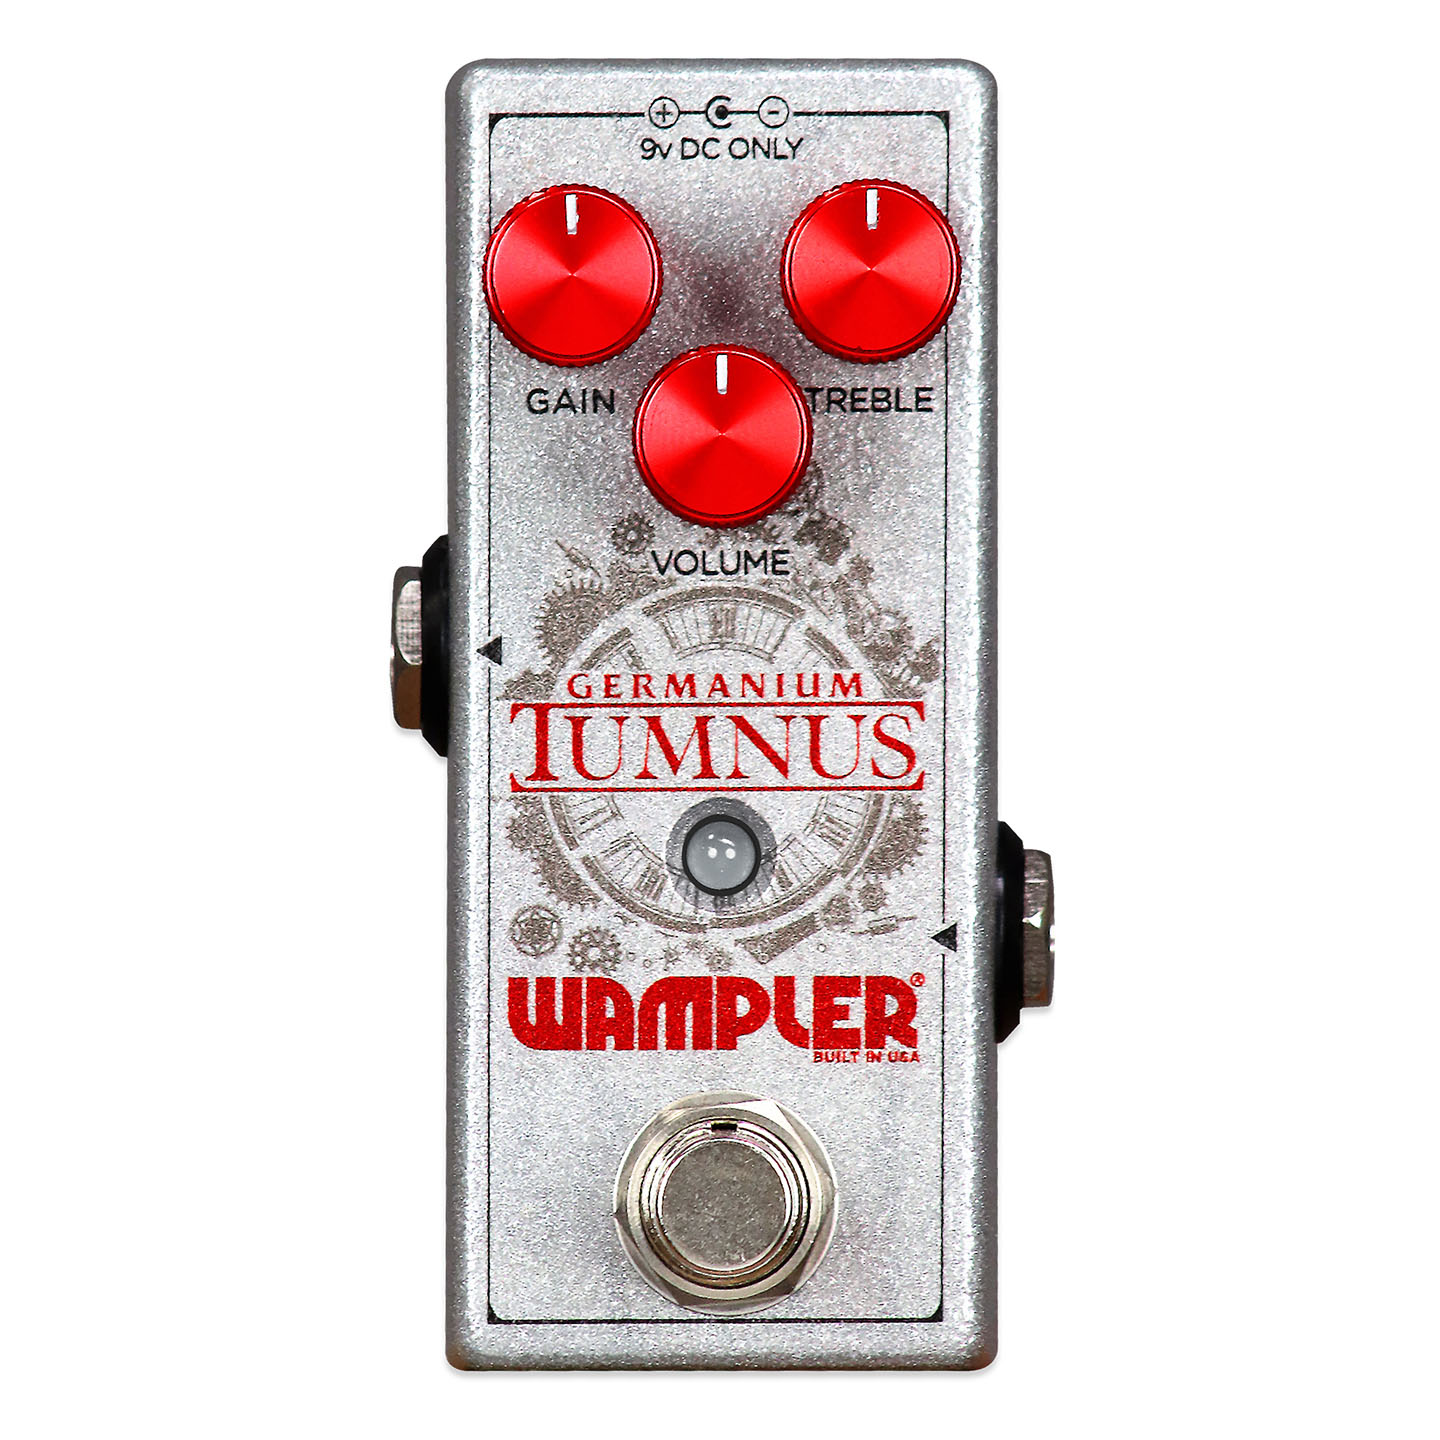 Boosts - just what is a clean boost? - Wampler Pedals